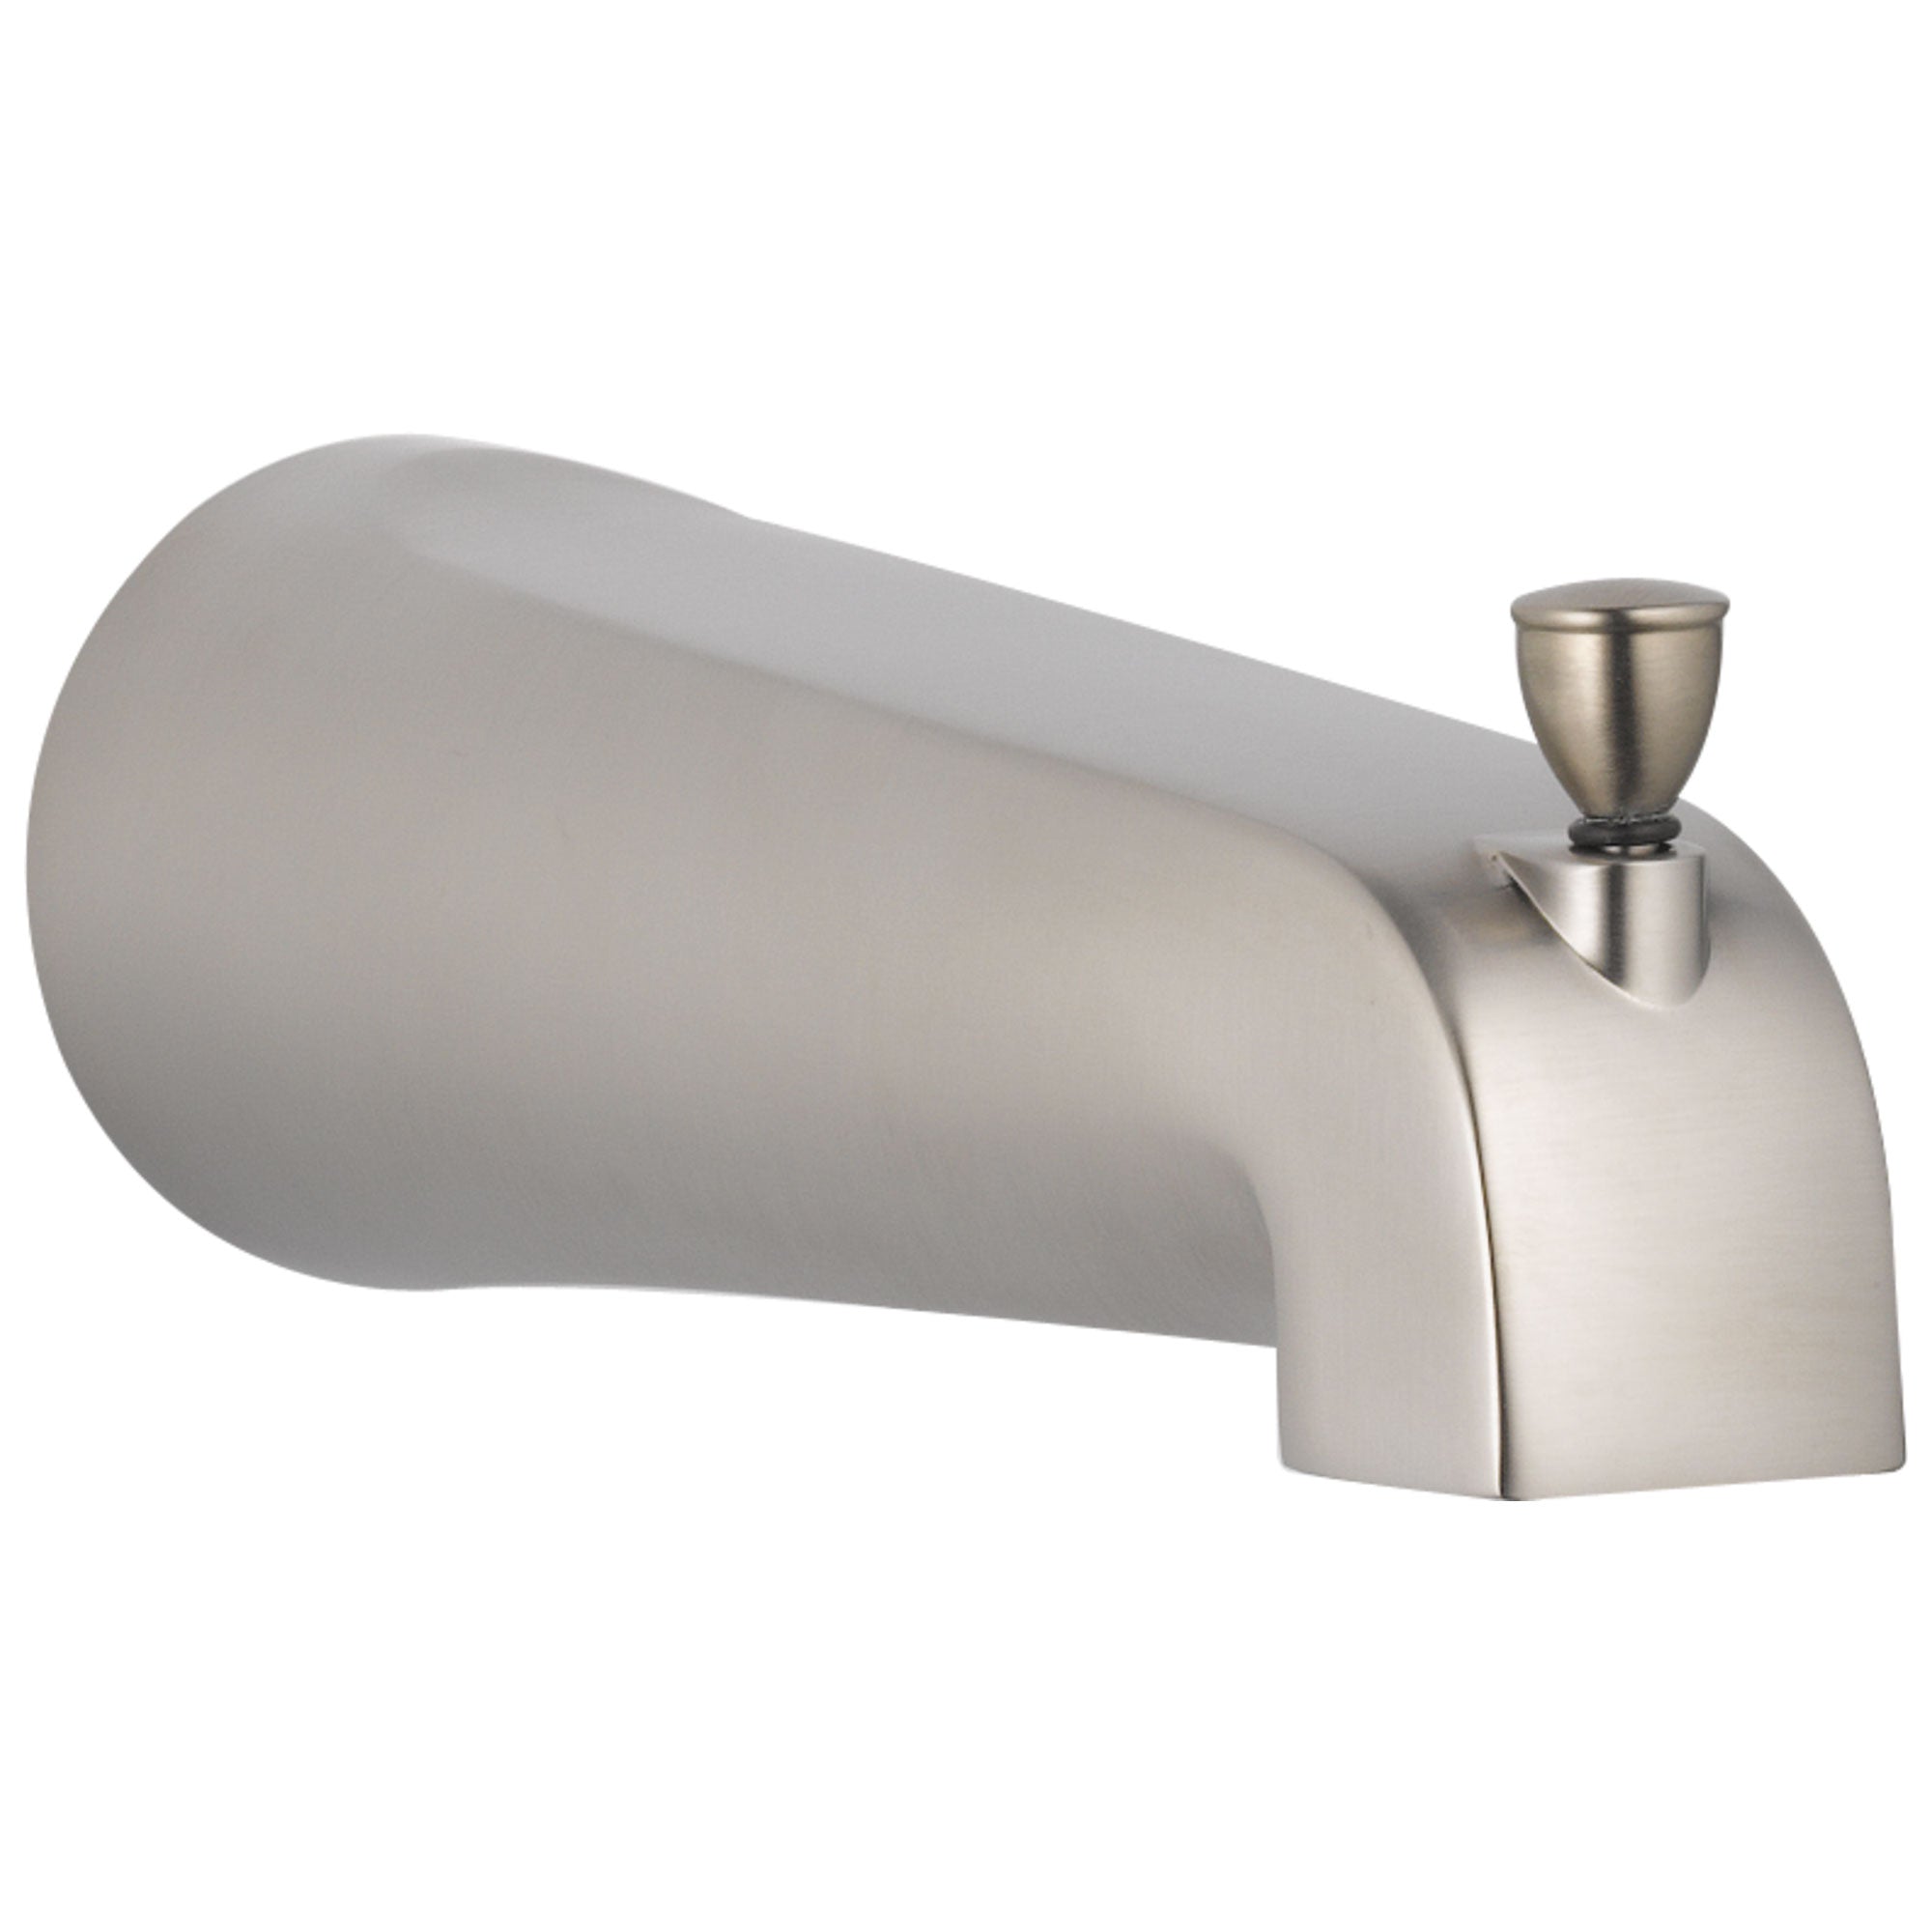 Delta Foundations Stainless Steel Finish Tub Spout with Pull-Up Diverter DRP64721SS